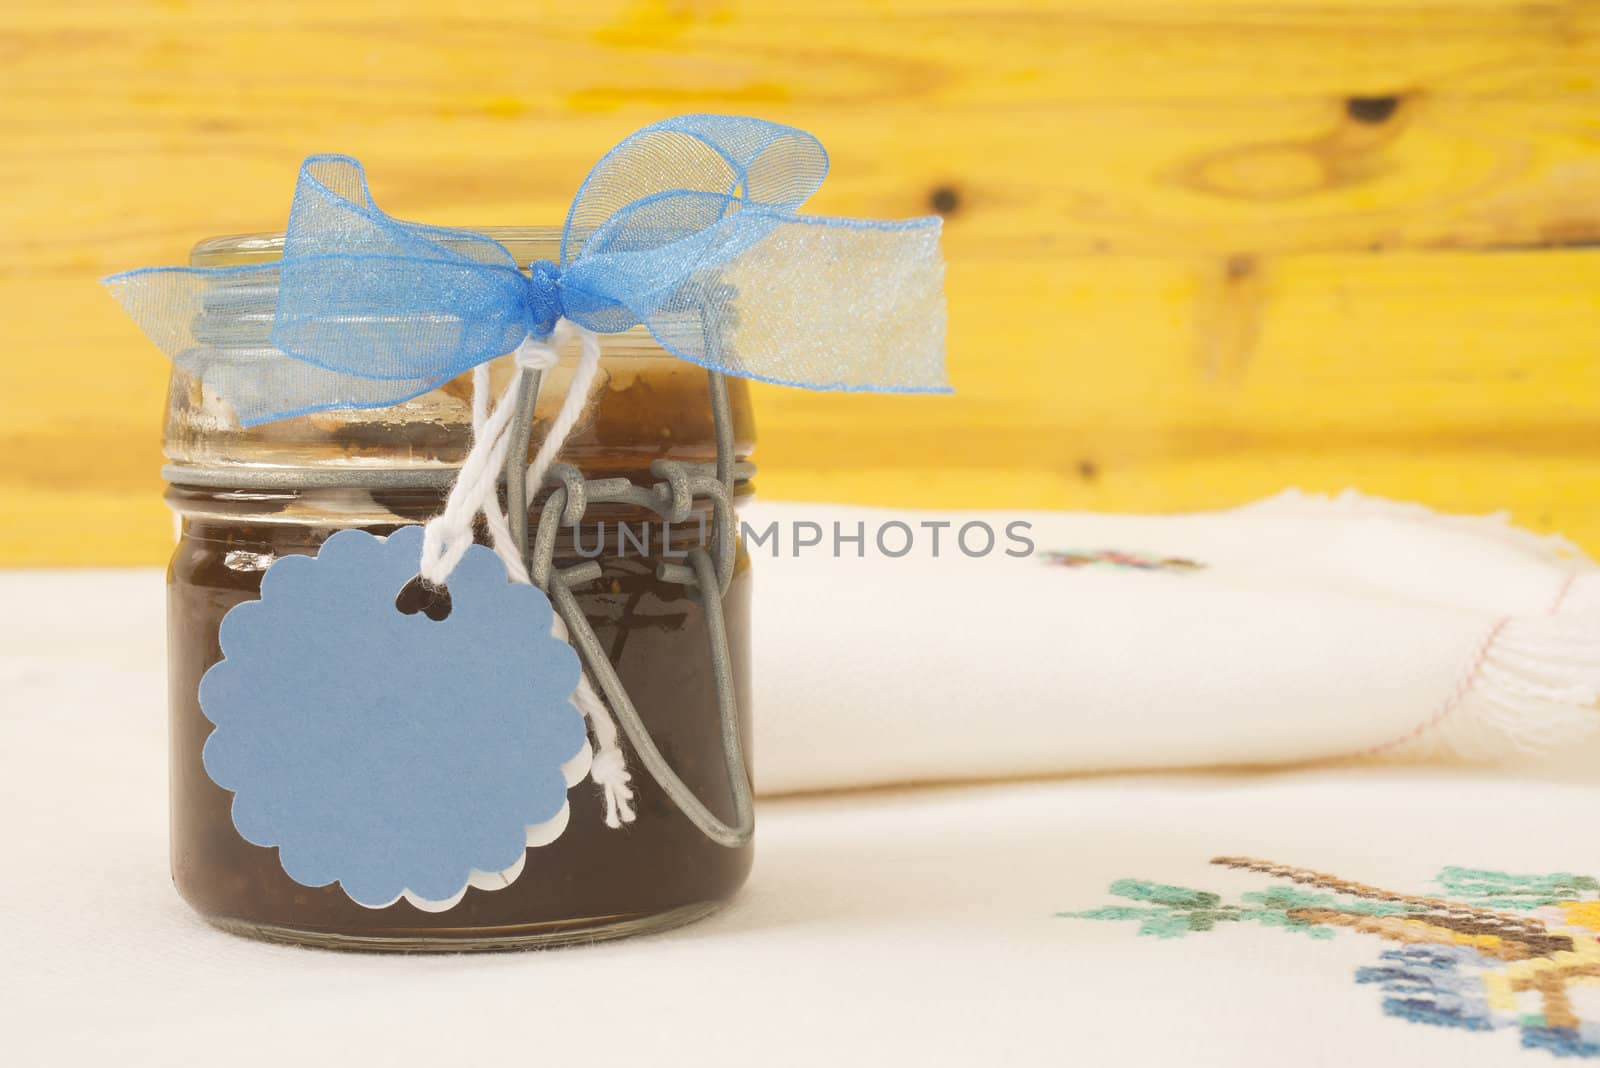 jam jar with blank label for text, tablecloth and napkin